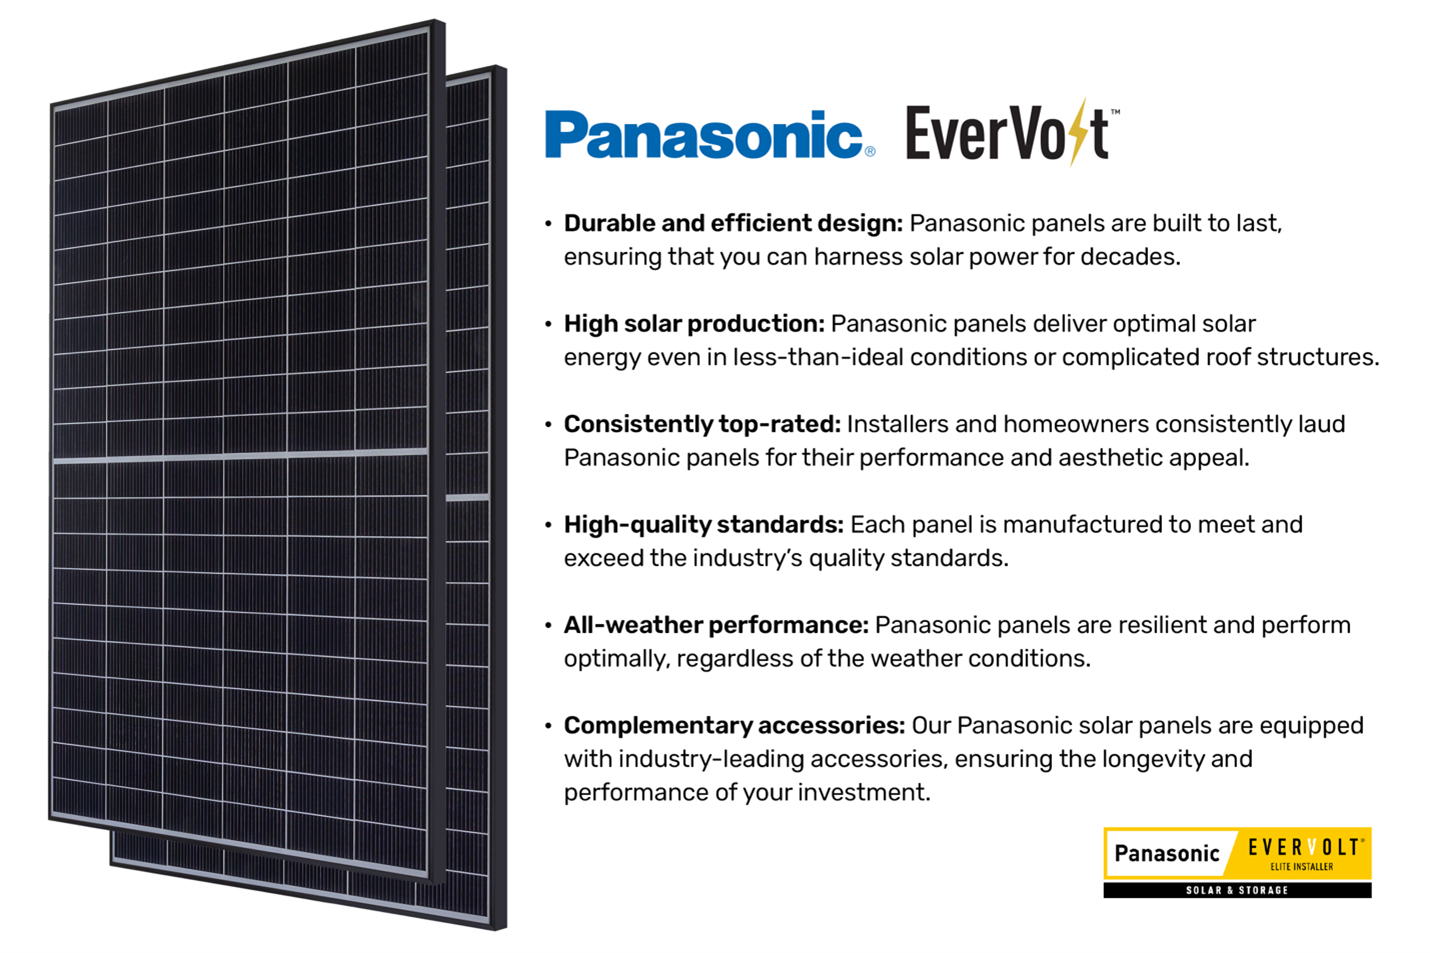 Panasonic EnerVolt key features include durable and efficient design; high solar production; consistent high ratings; high quality standards; all weather performance; and complementary accessories